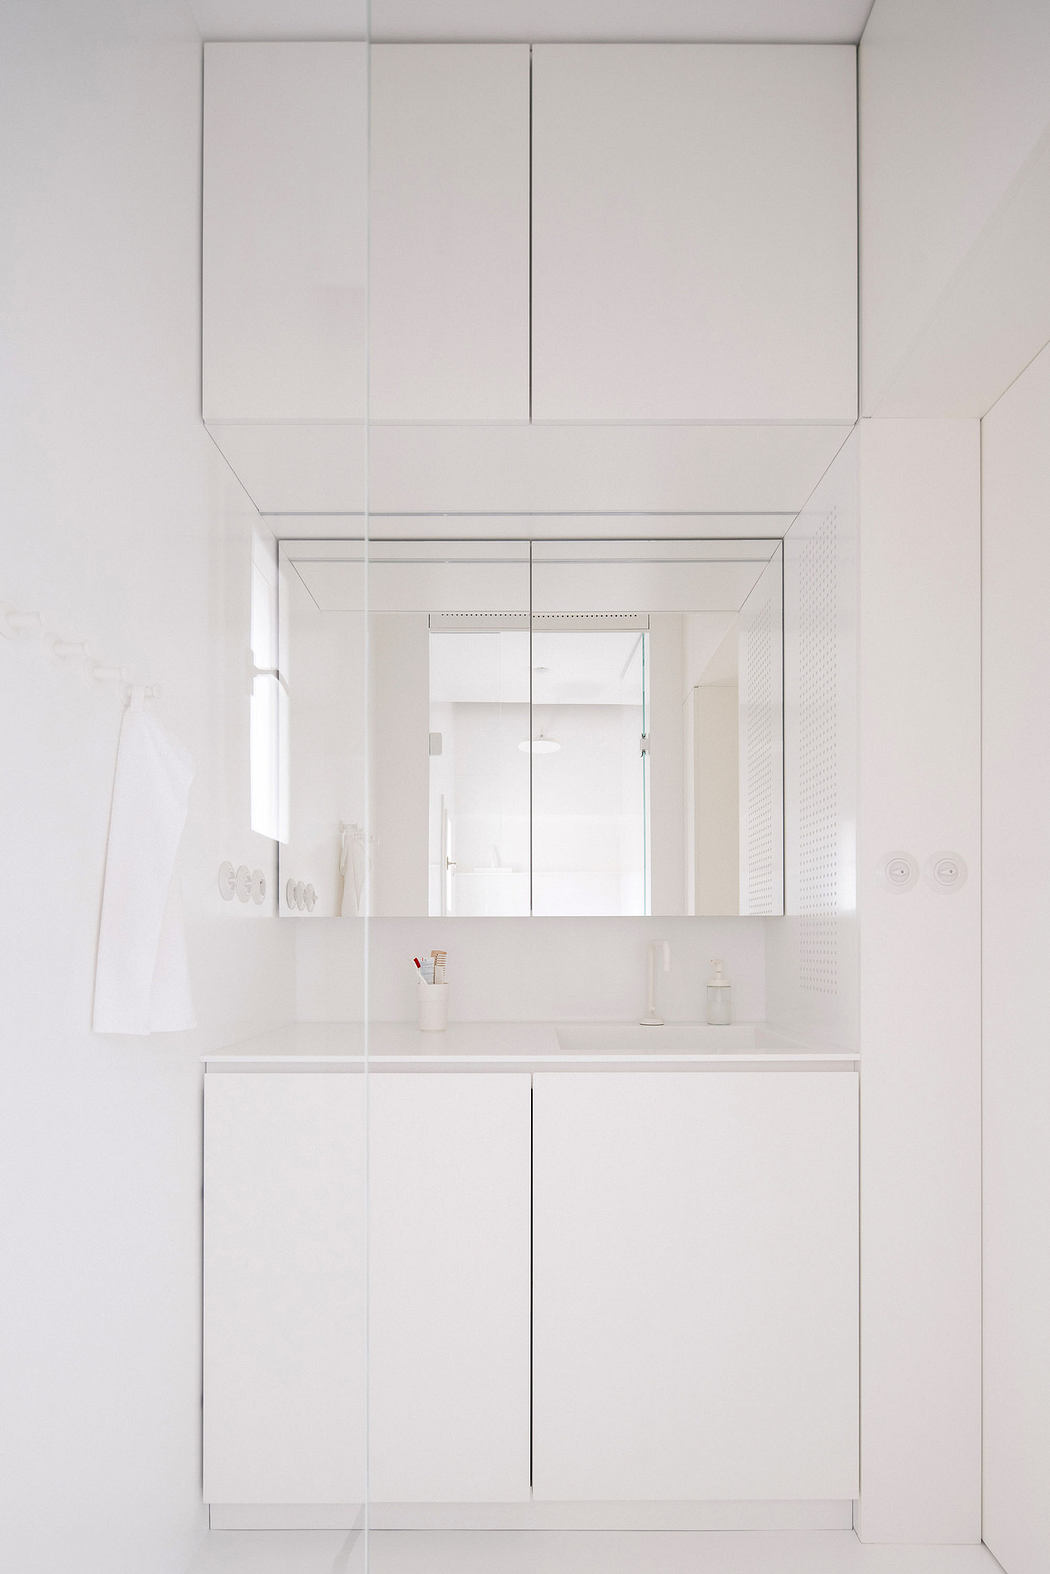 Minimalist white bathroom cabinetry with a mirrored wall cabinet.